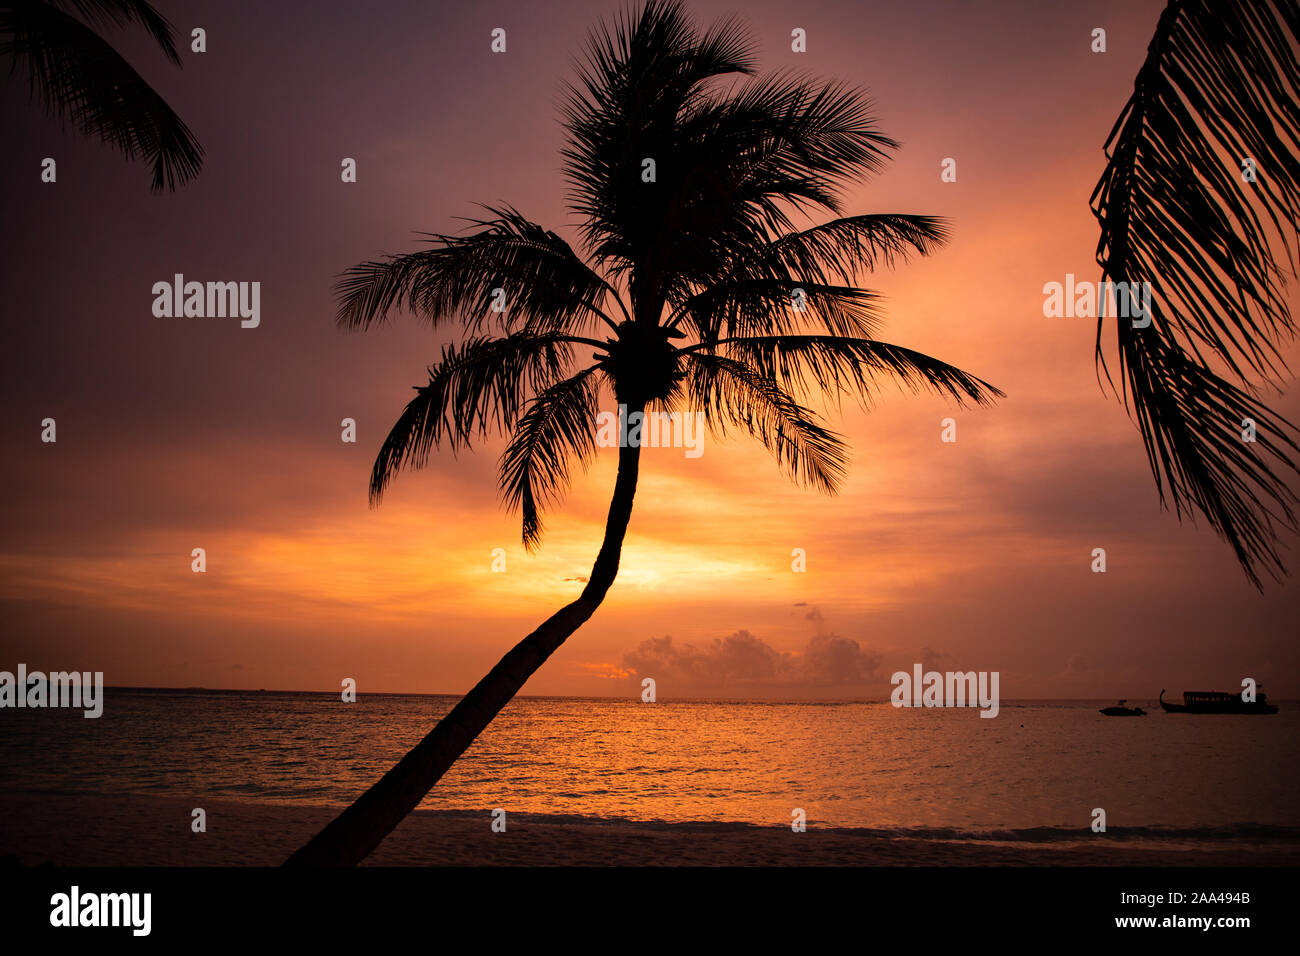 Silhouette of a pam tree on beach at sunset, Maldives Stock Photo